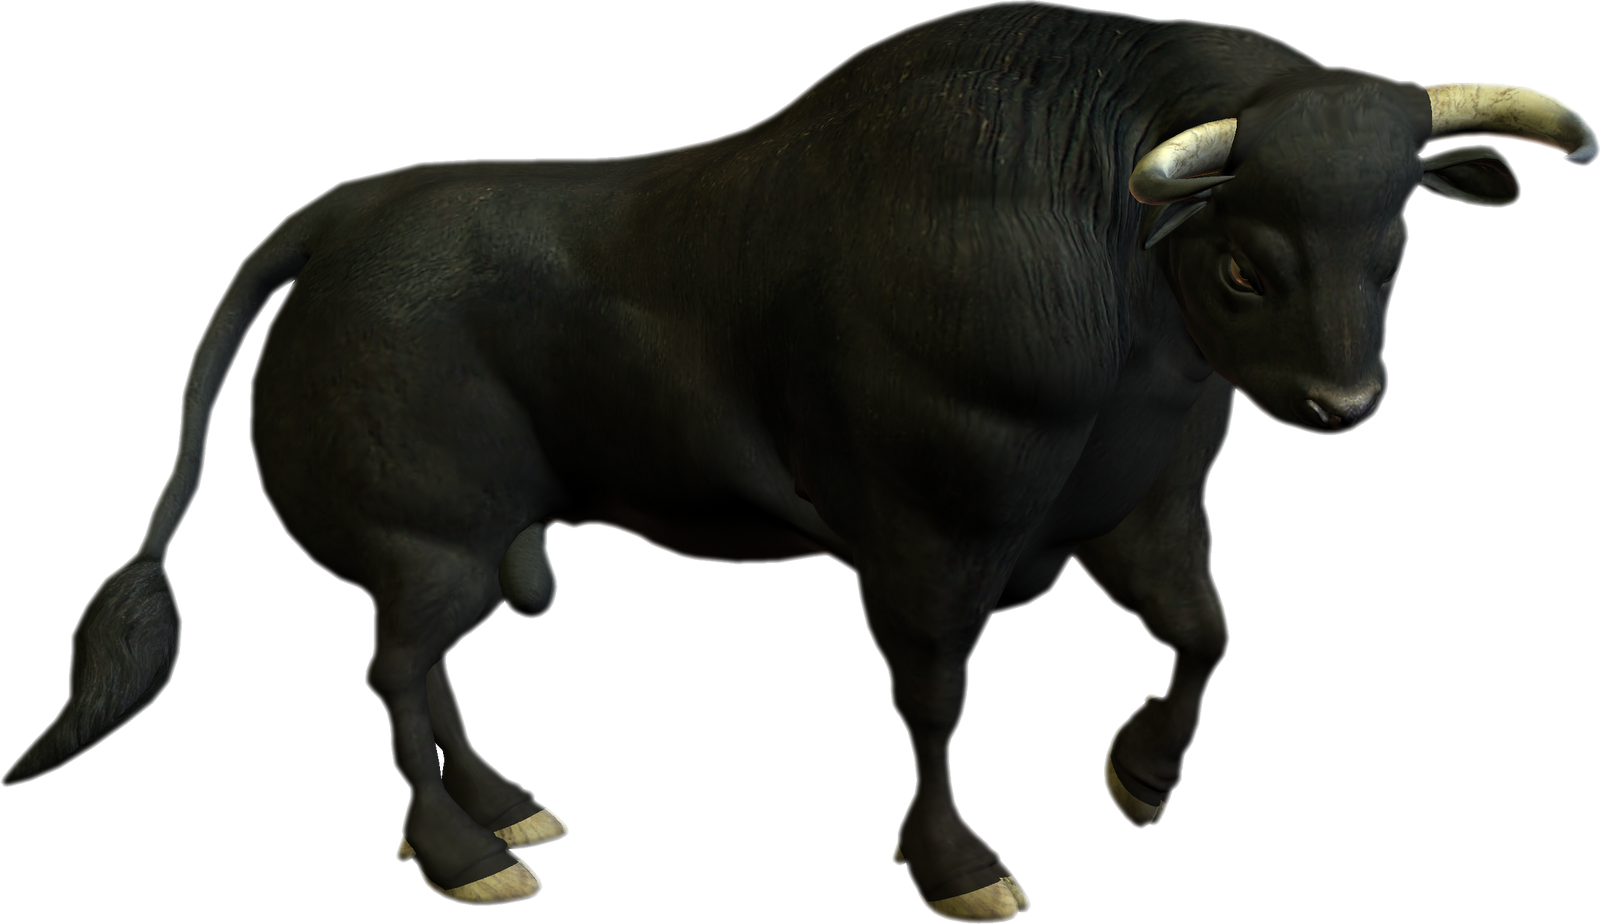 Bull Backgrounds, Compatible - PC, Mobile, Gadgets| 1600x924 px